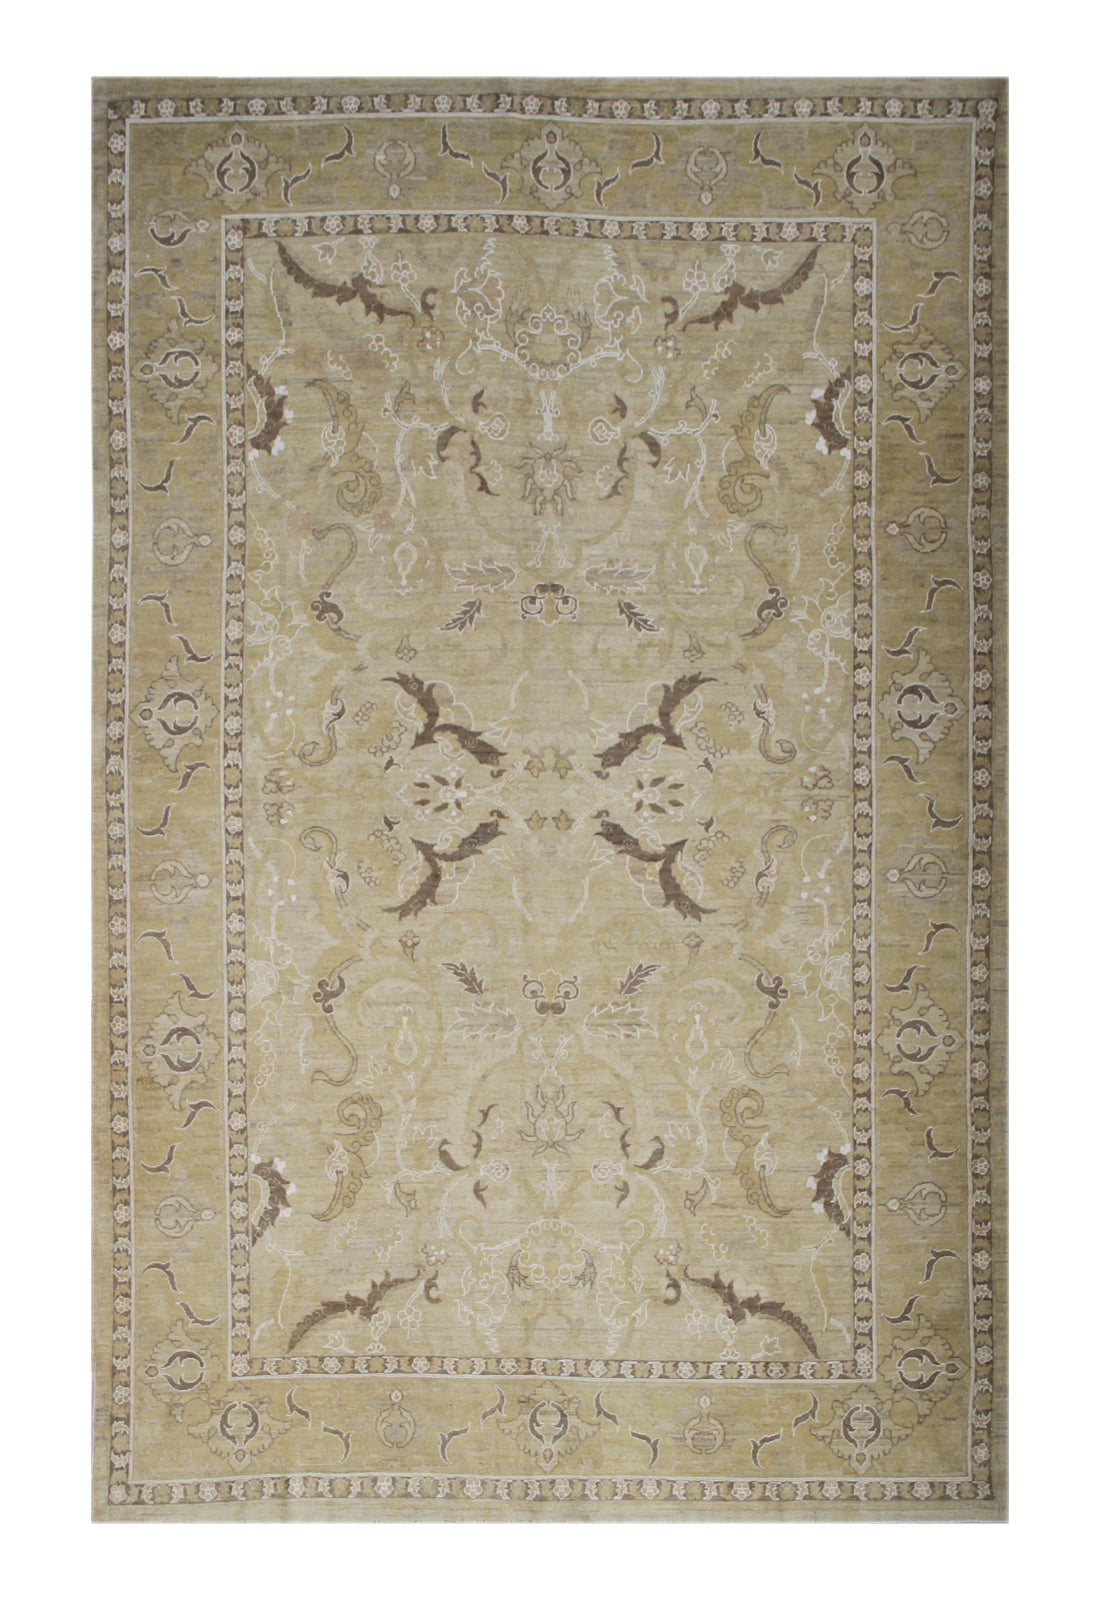 6x9 Ariana Luxury Hand Knotted area Rug.